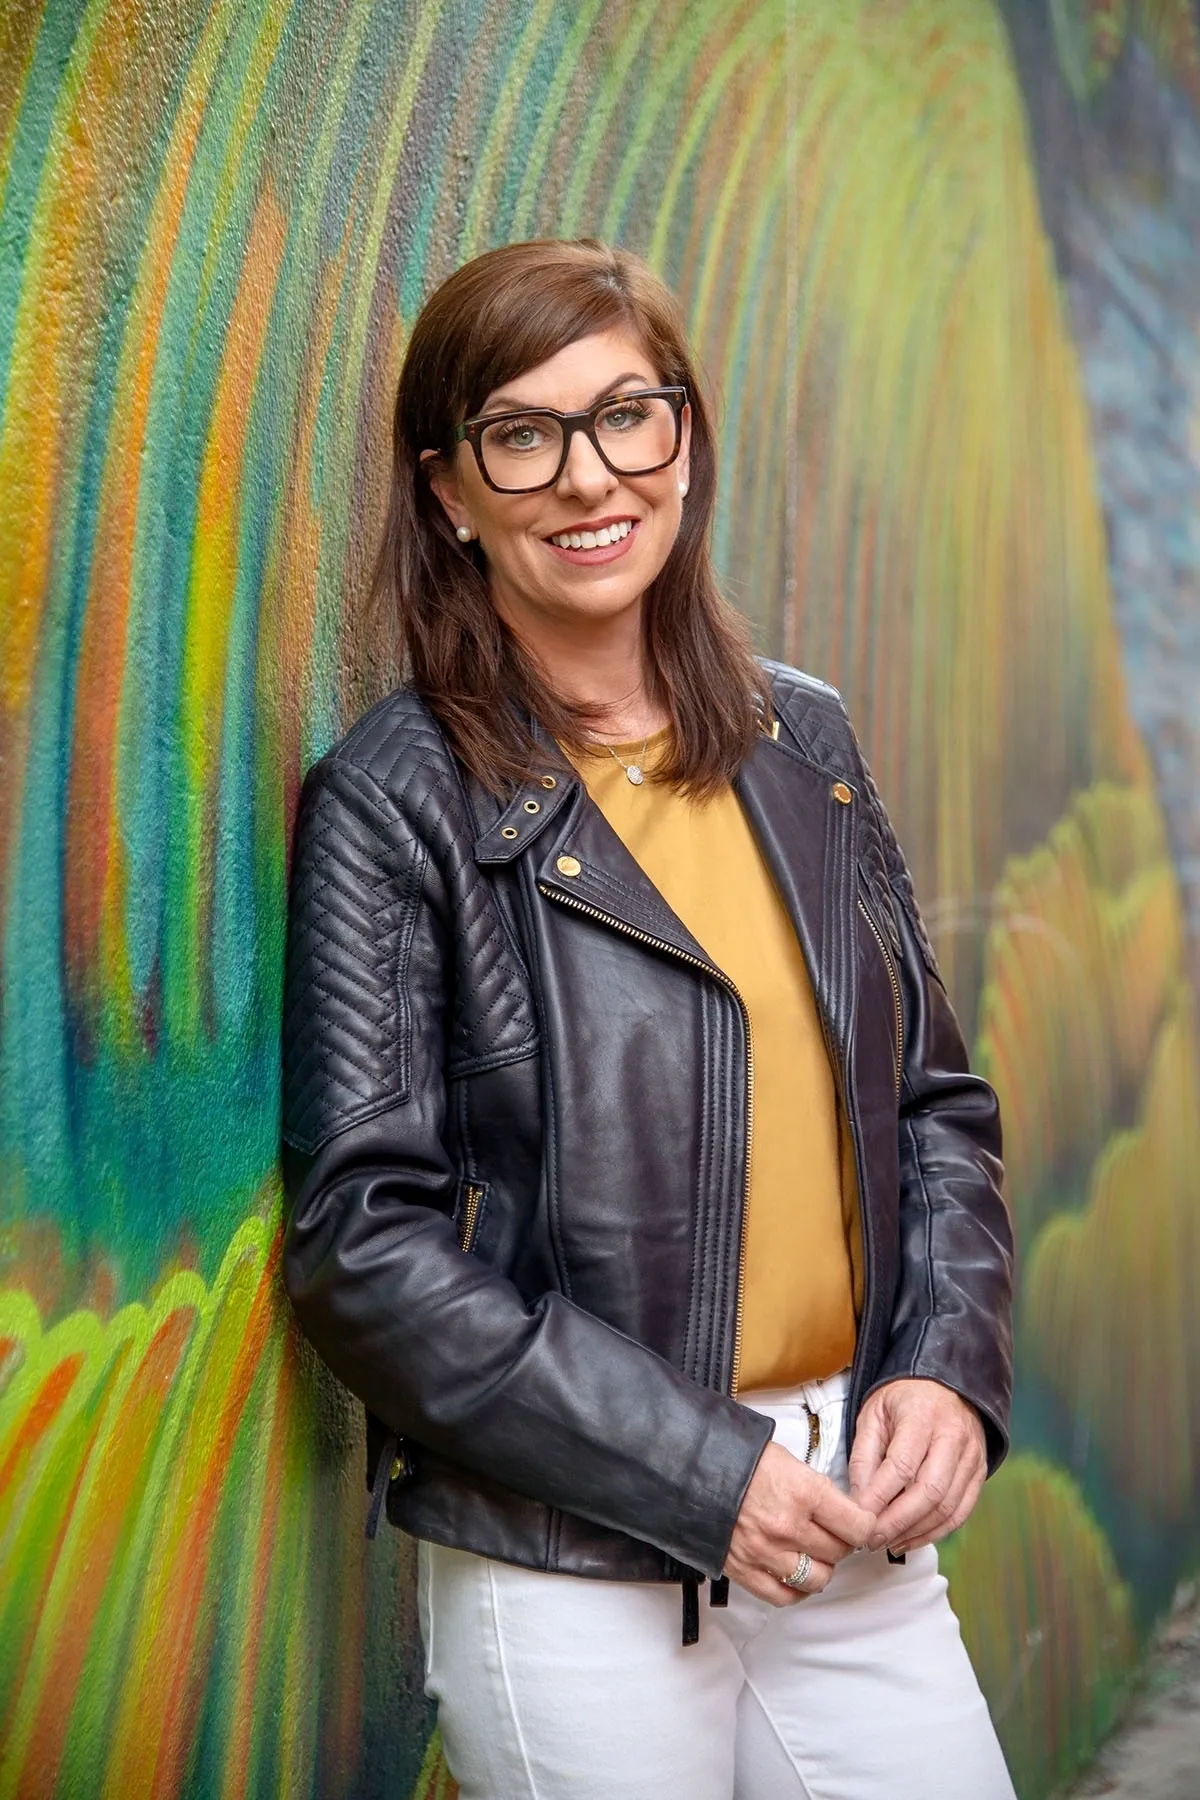 A woman in glasses and leather jacket standing next to a wall.